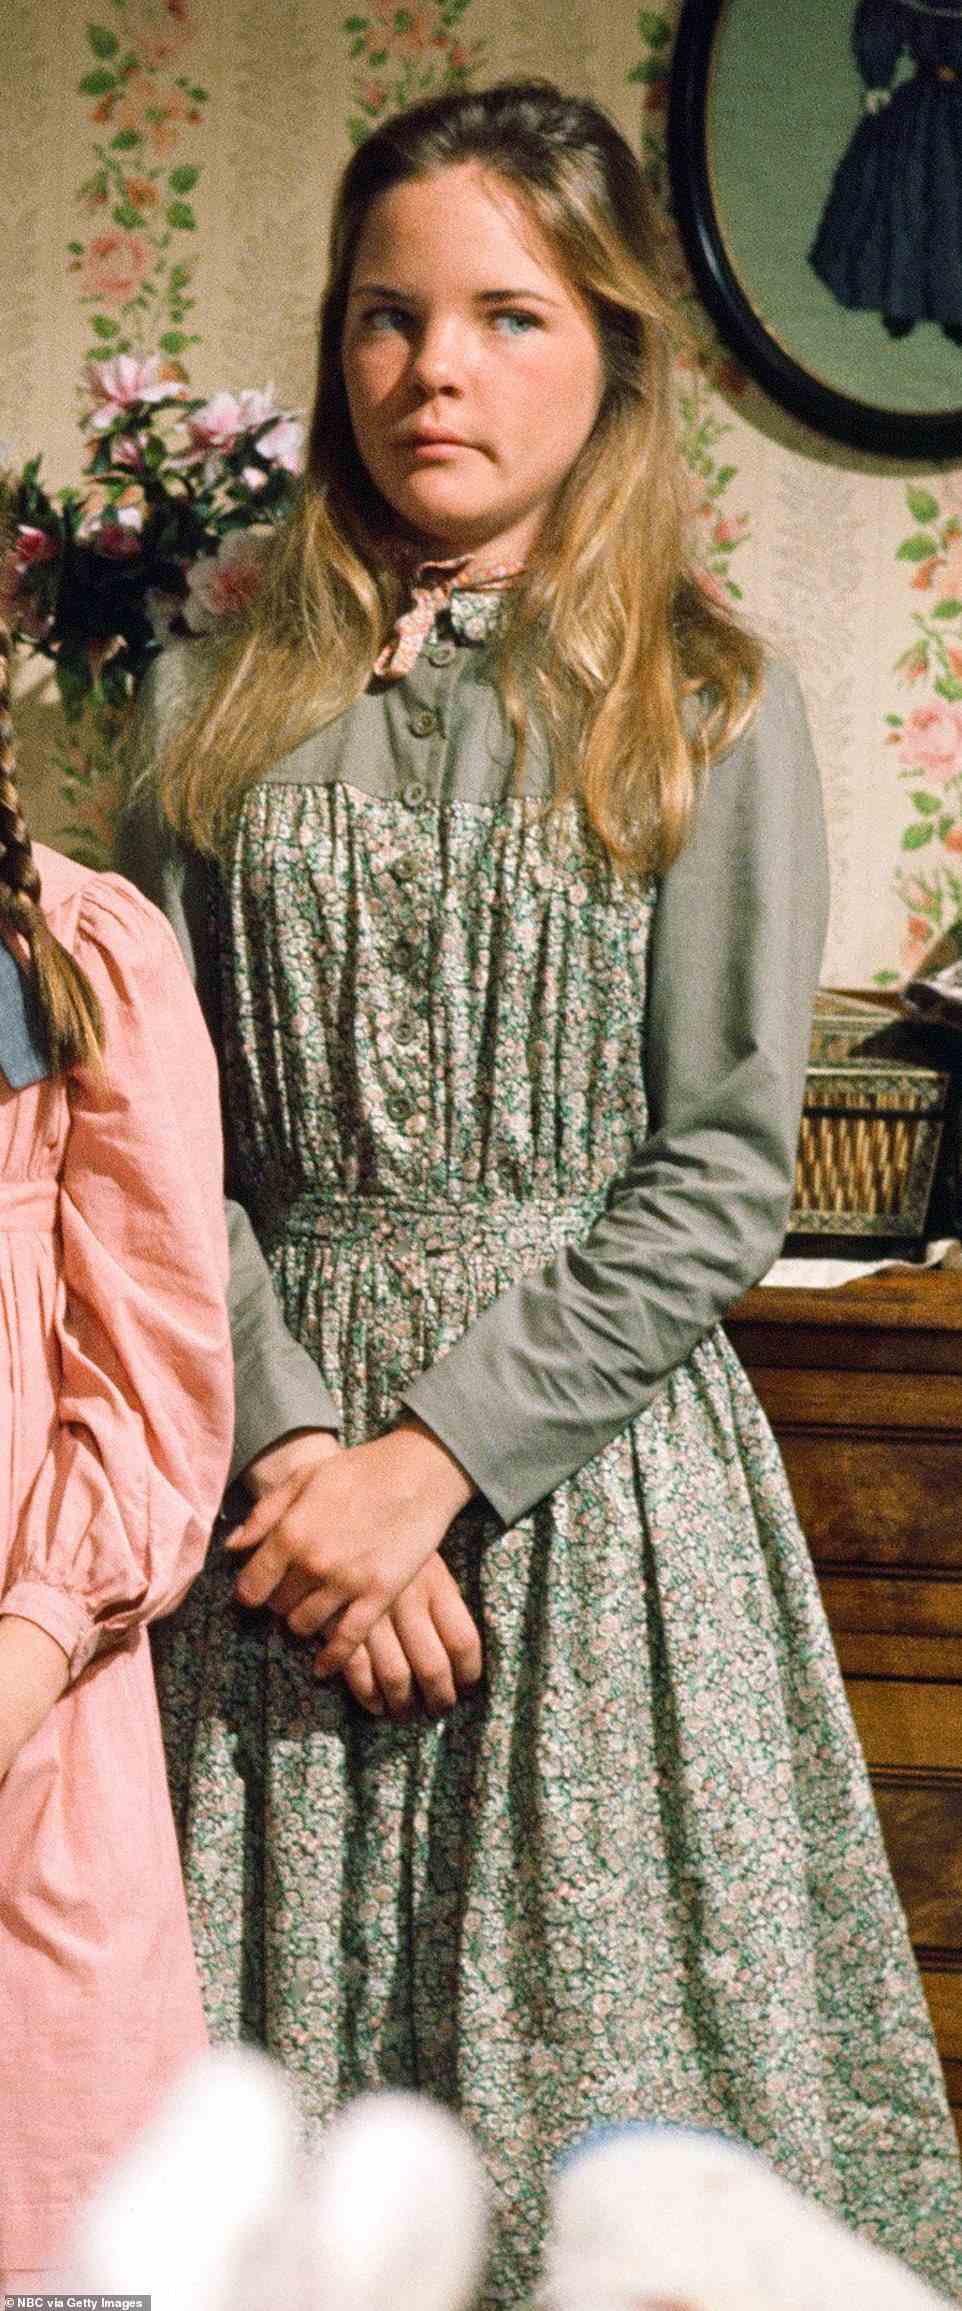 Anderson, 59, who was born on September 26, 1962, hails from Berkeley, California. Her first on-screen role was an episode of Bewitched in 1972. She also had a guest appearance in one episode of The Brady Bunch. She is pictured in Little House